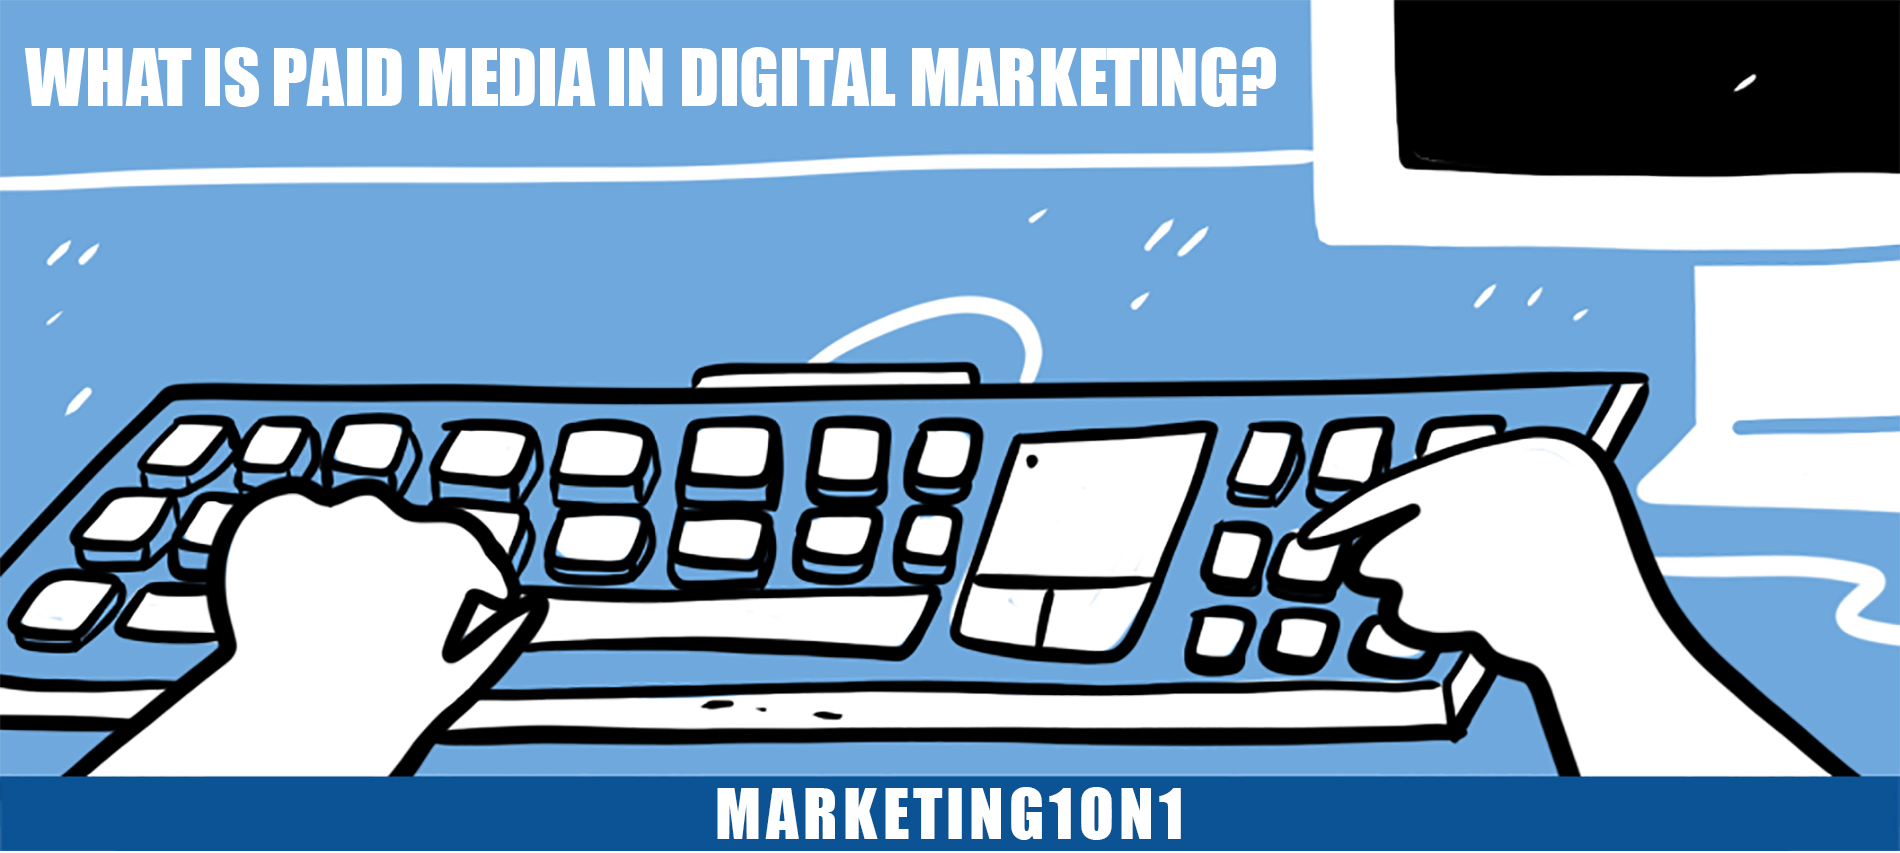 what is paid media in digital marketing?